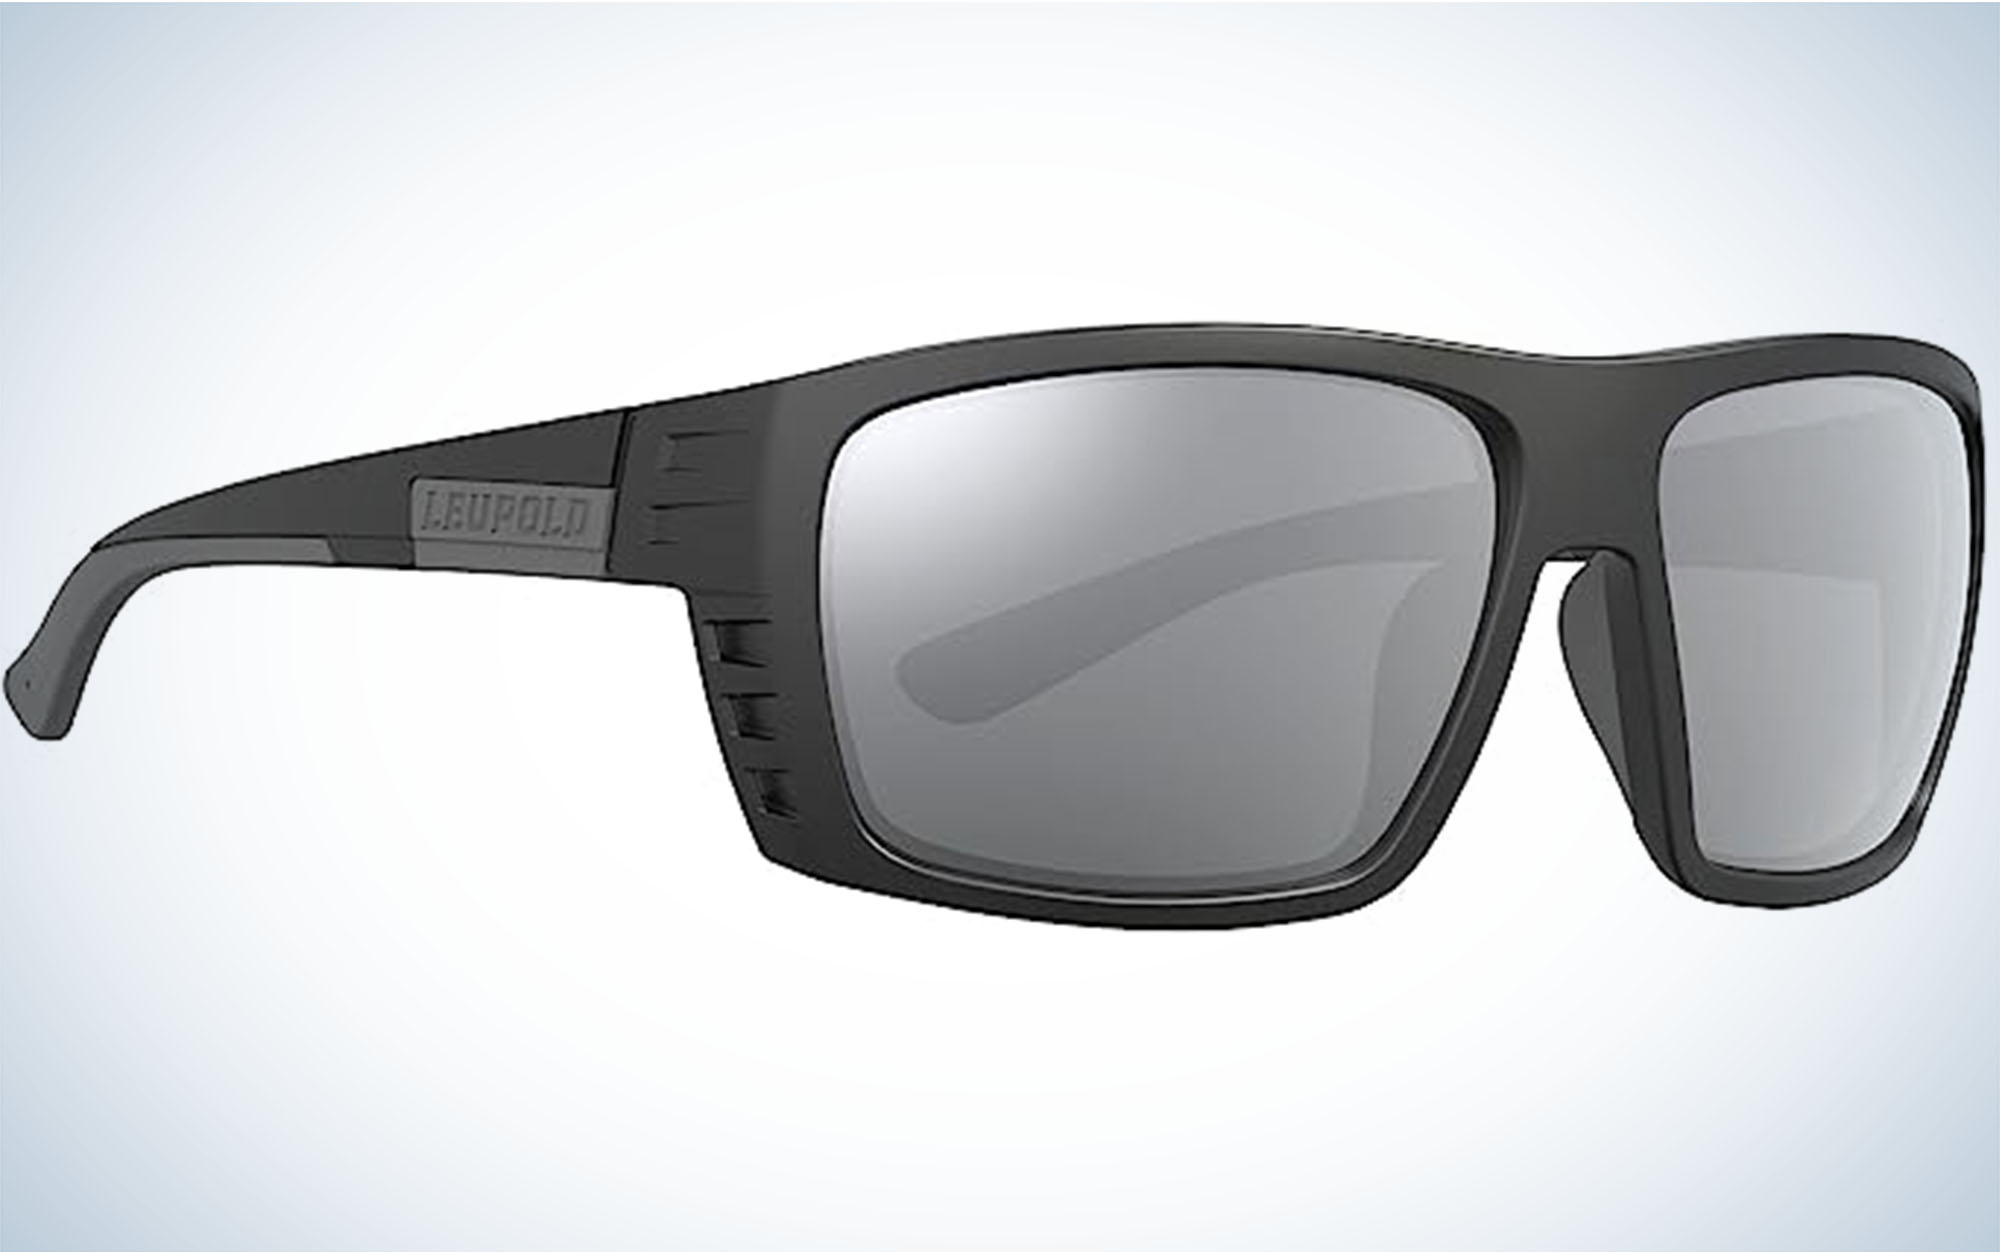 The Leupold Payload are the best shooting glasses for casual wear.